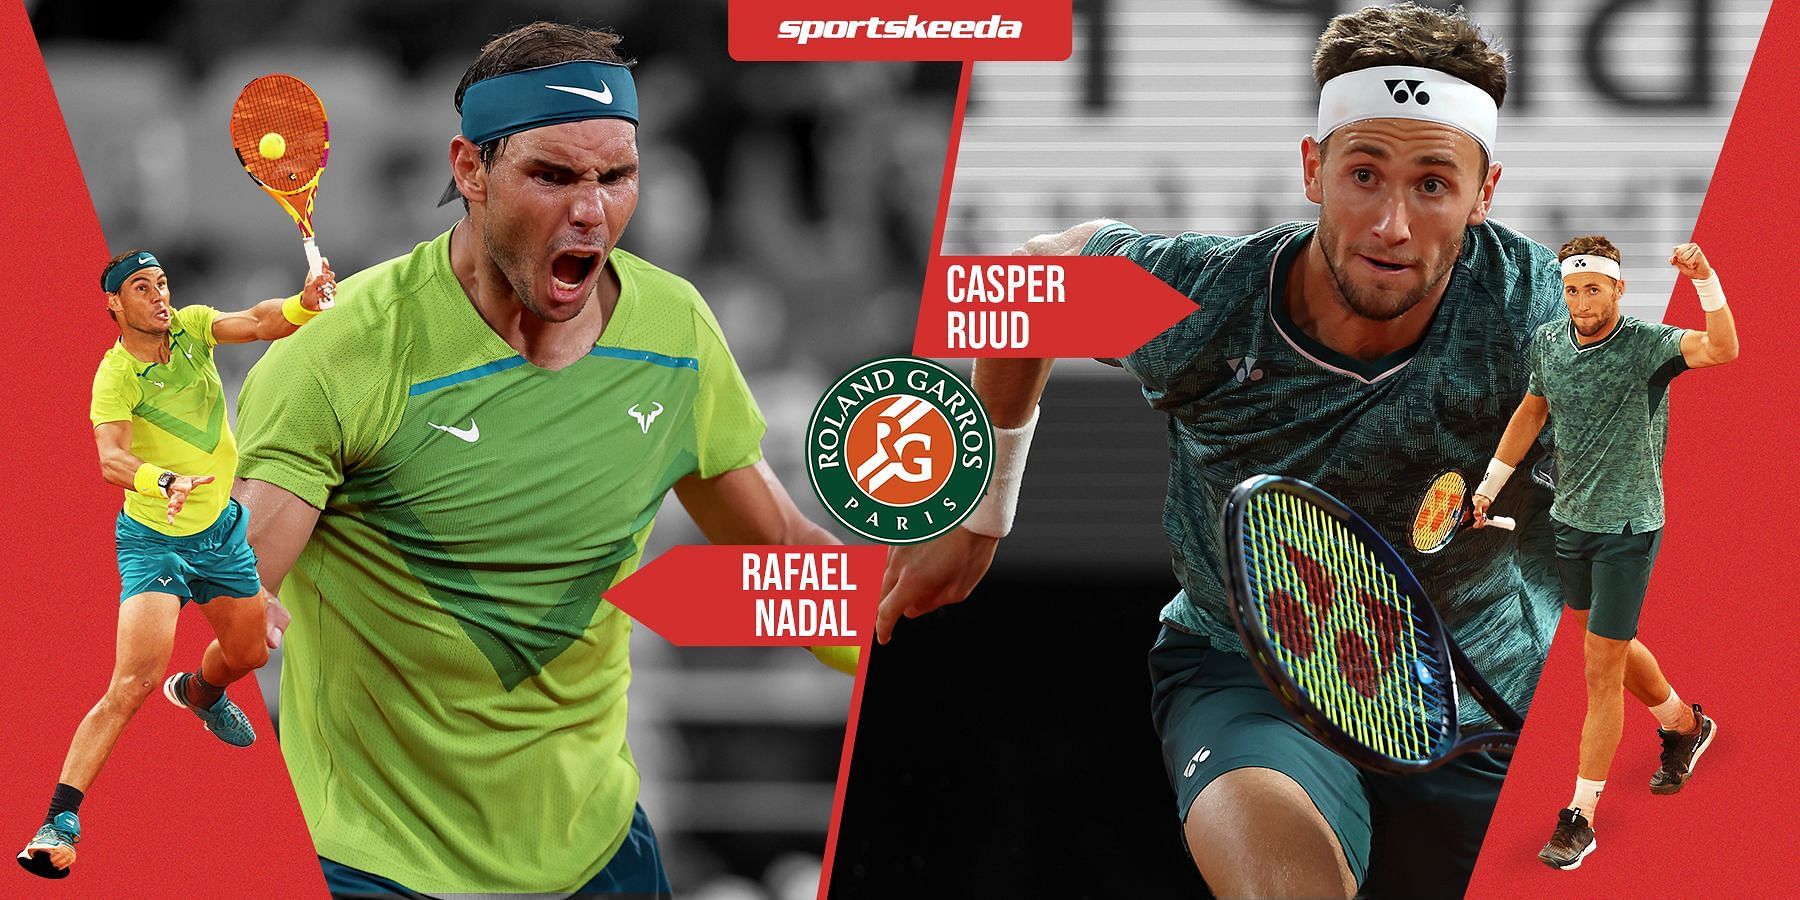 Rafael Nadal and Casper Ruud will lock horns in the 2022 French Open final.